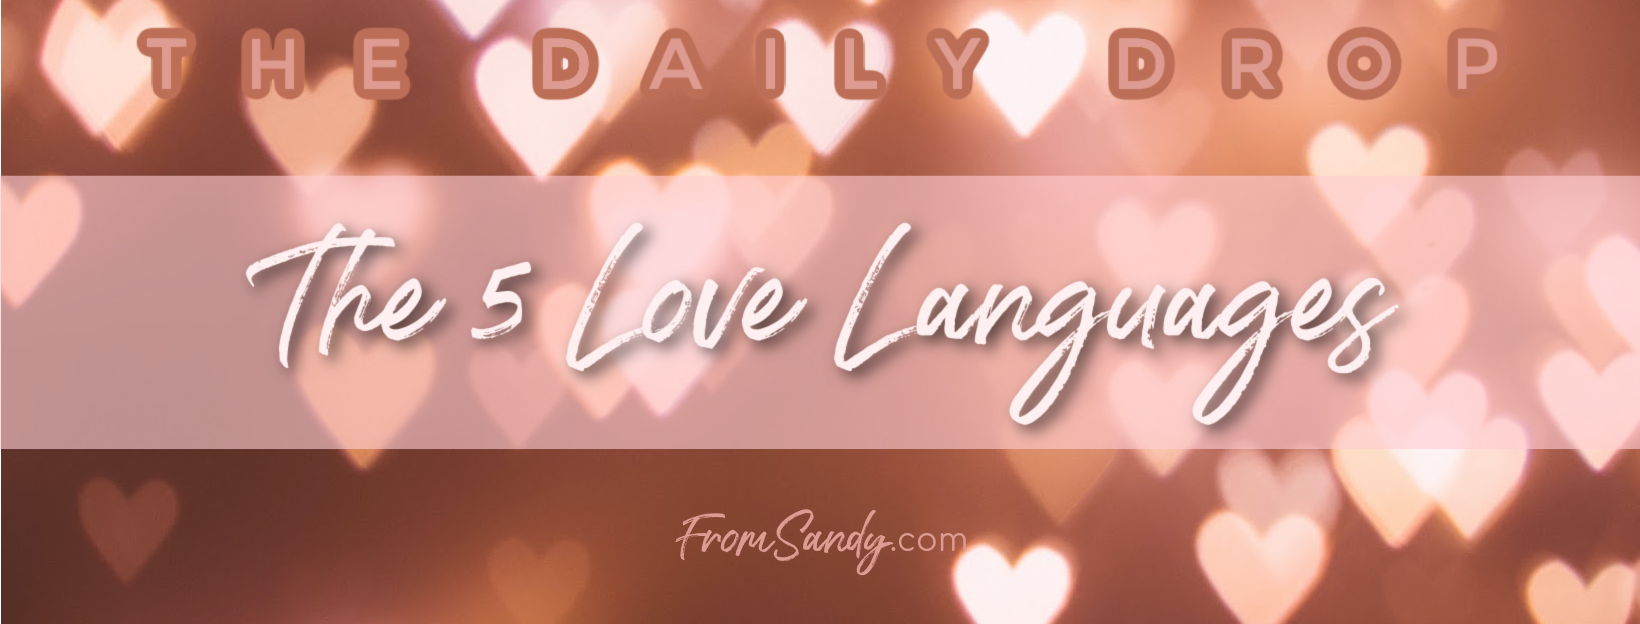 The 5 Love Languages, From Sandy